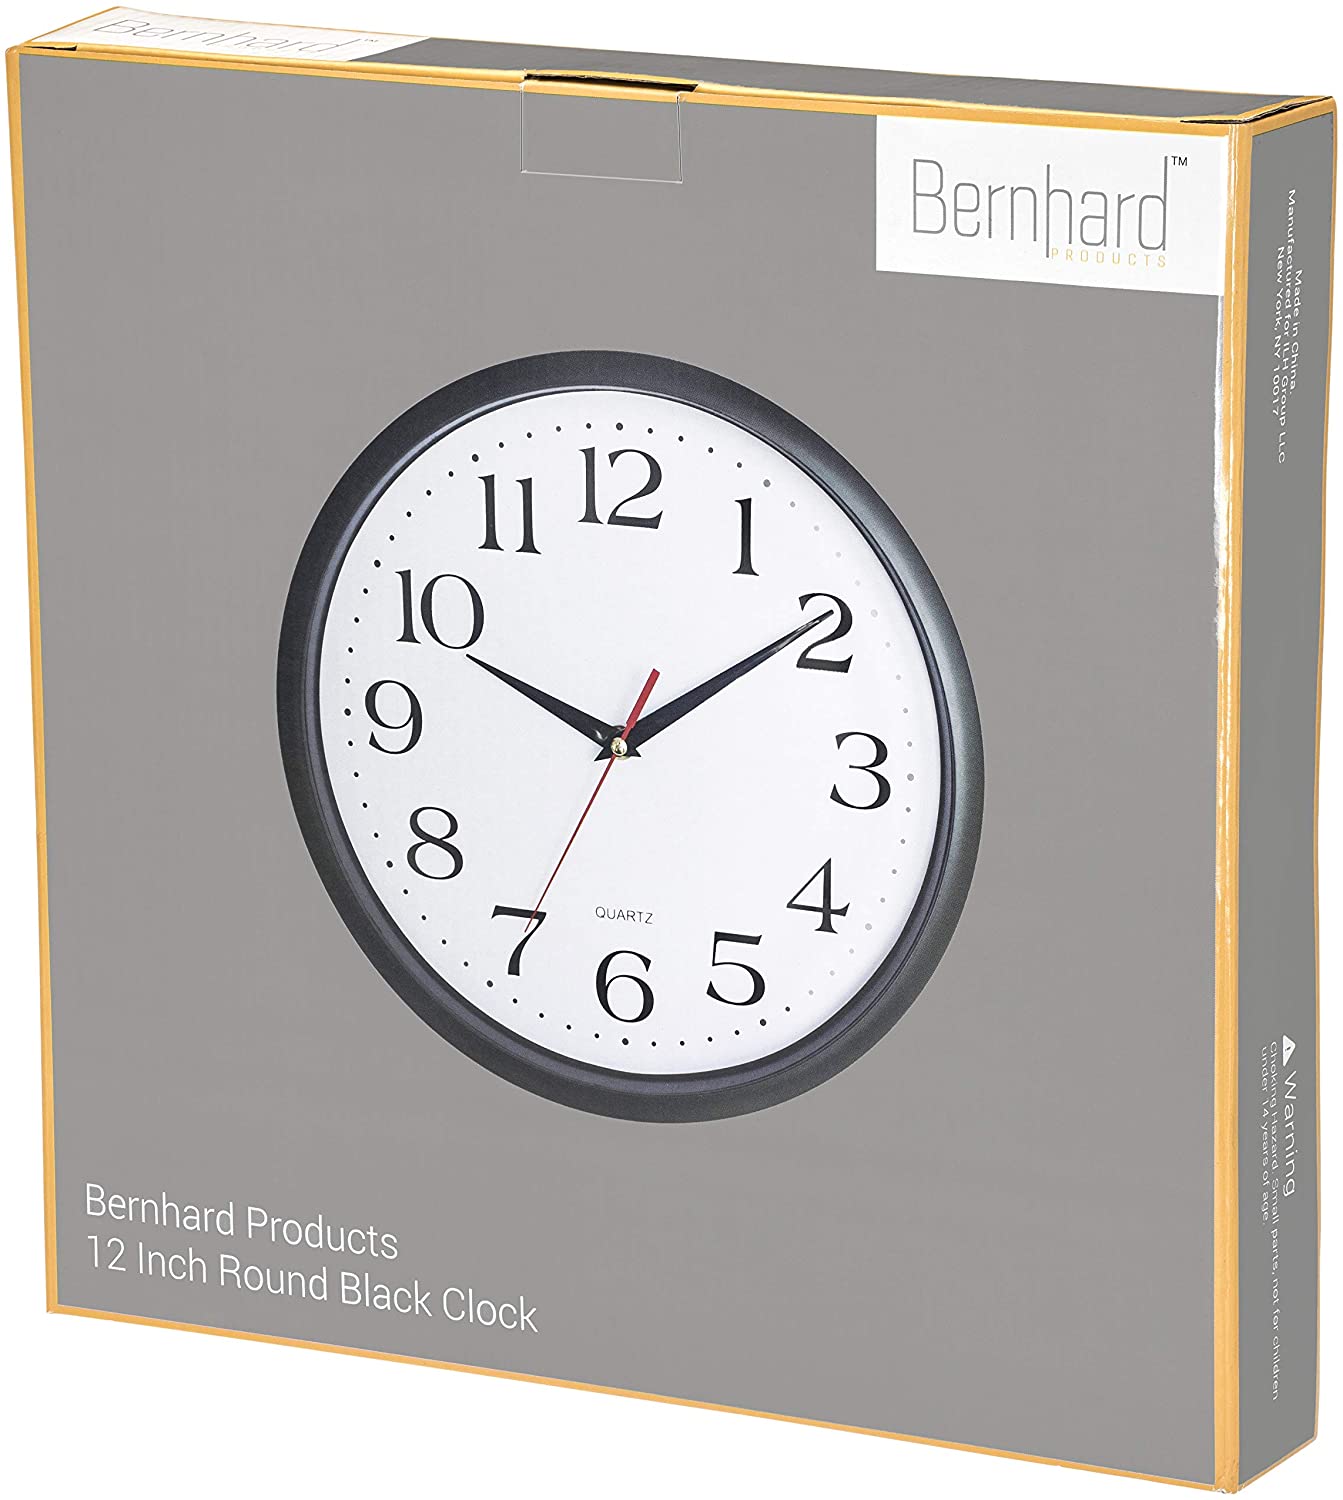 Bernhard Products Black Wall Clock, Silent Non Ticking - 12 Inch Quality Quartz Battery Operated Round Easy to Read Home/Office/School Clock Sweep Movement (12 Inch) - image 3 of 3